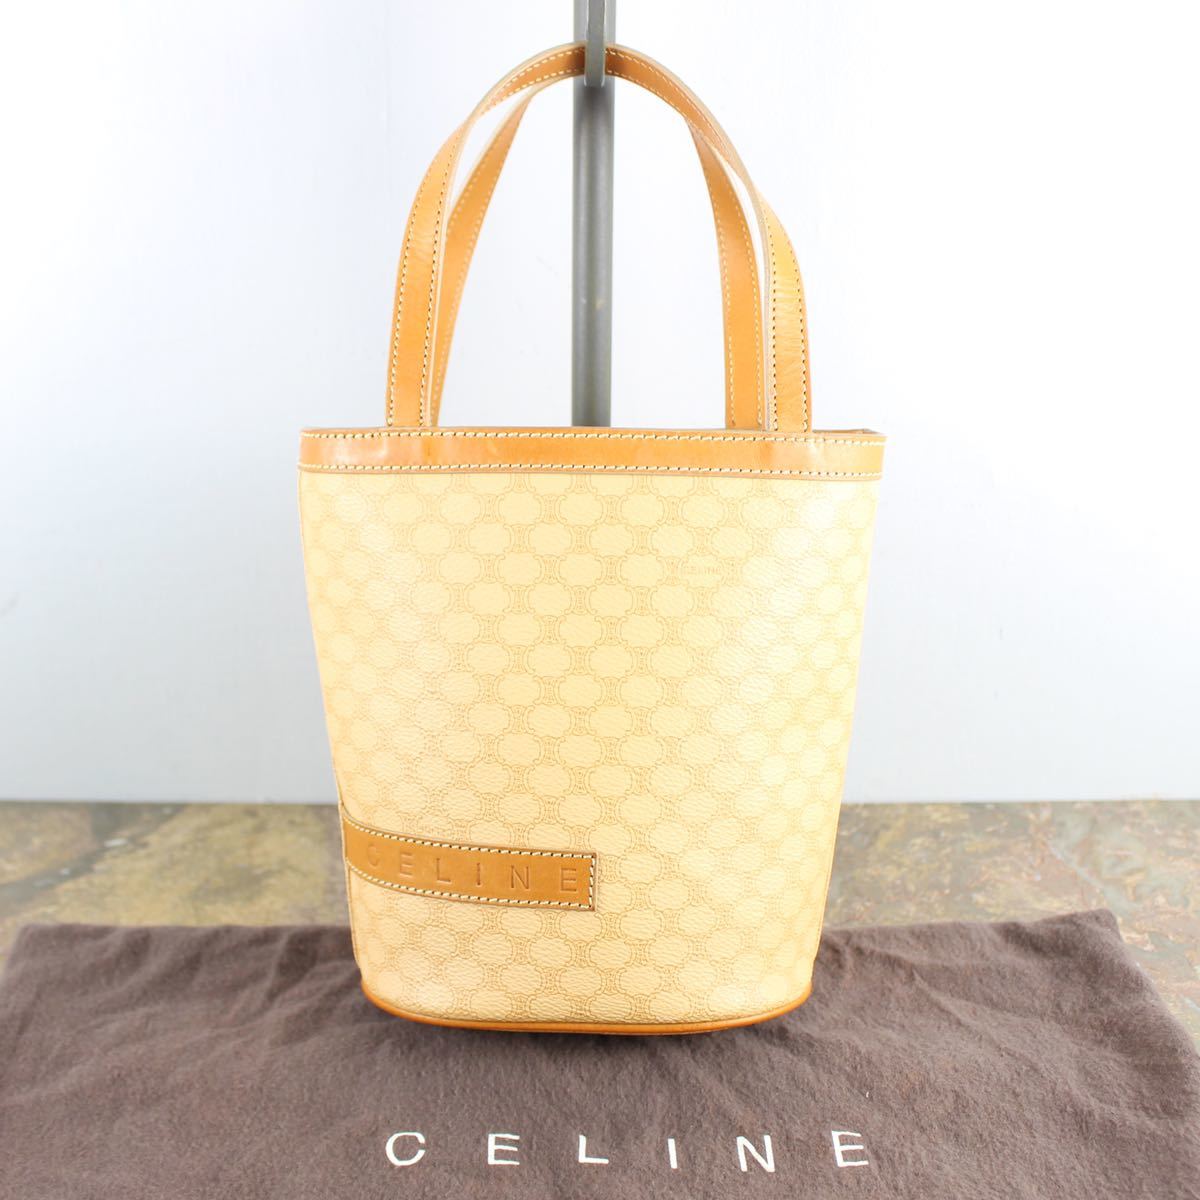 OLD CELINE MACADAM PATTERNED 正規通販 BACKET TYPE HAND BAG IN MADE ITALY 2021年激安 オールドセリーヌマカダム柄ハンドバッグ